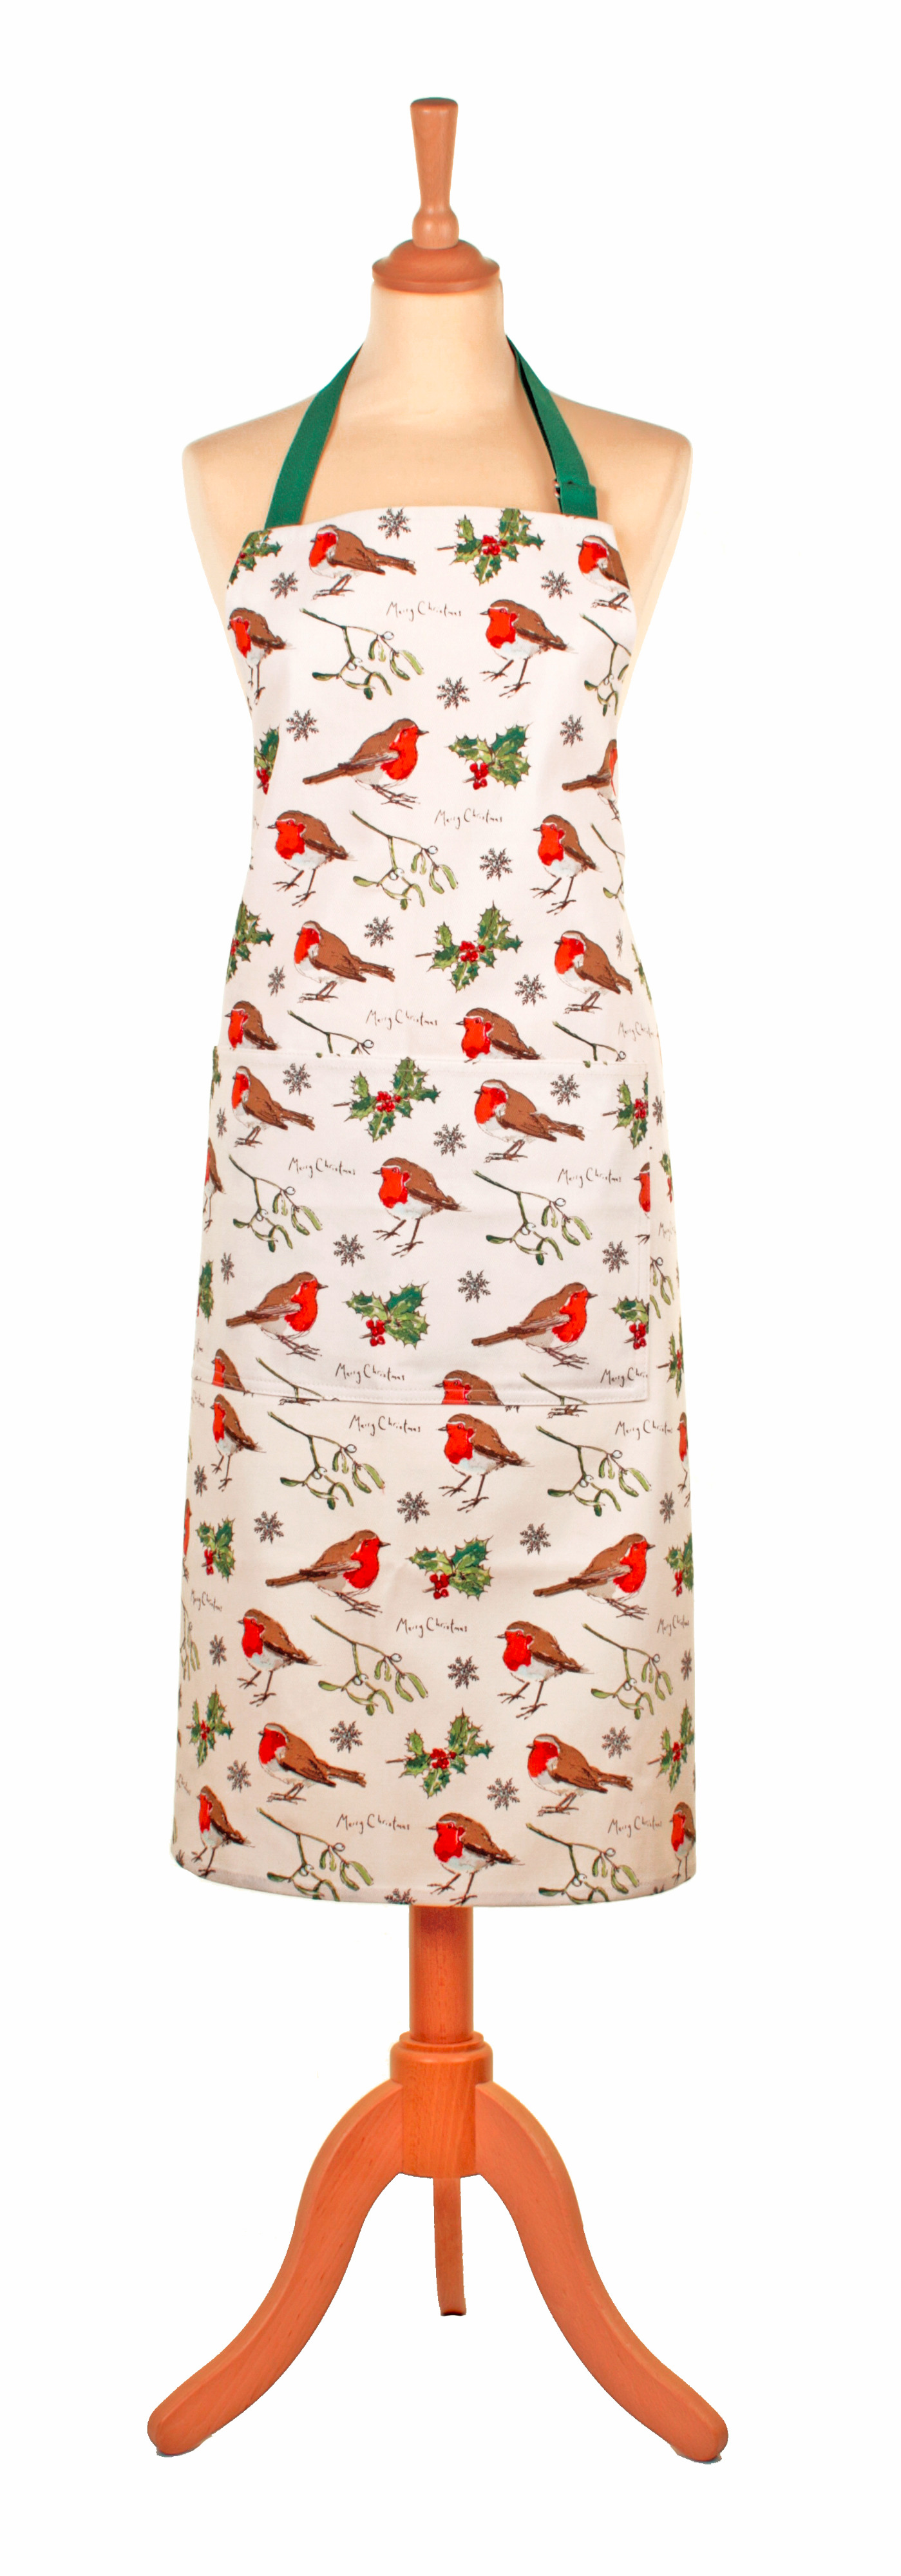 Ulster Weavers Robins & Holly Apron